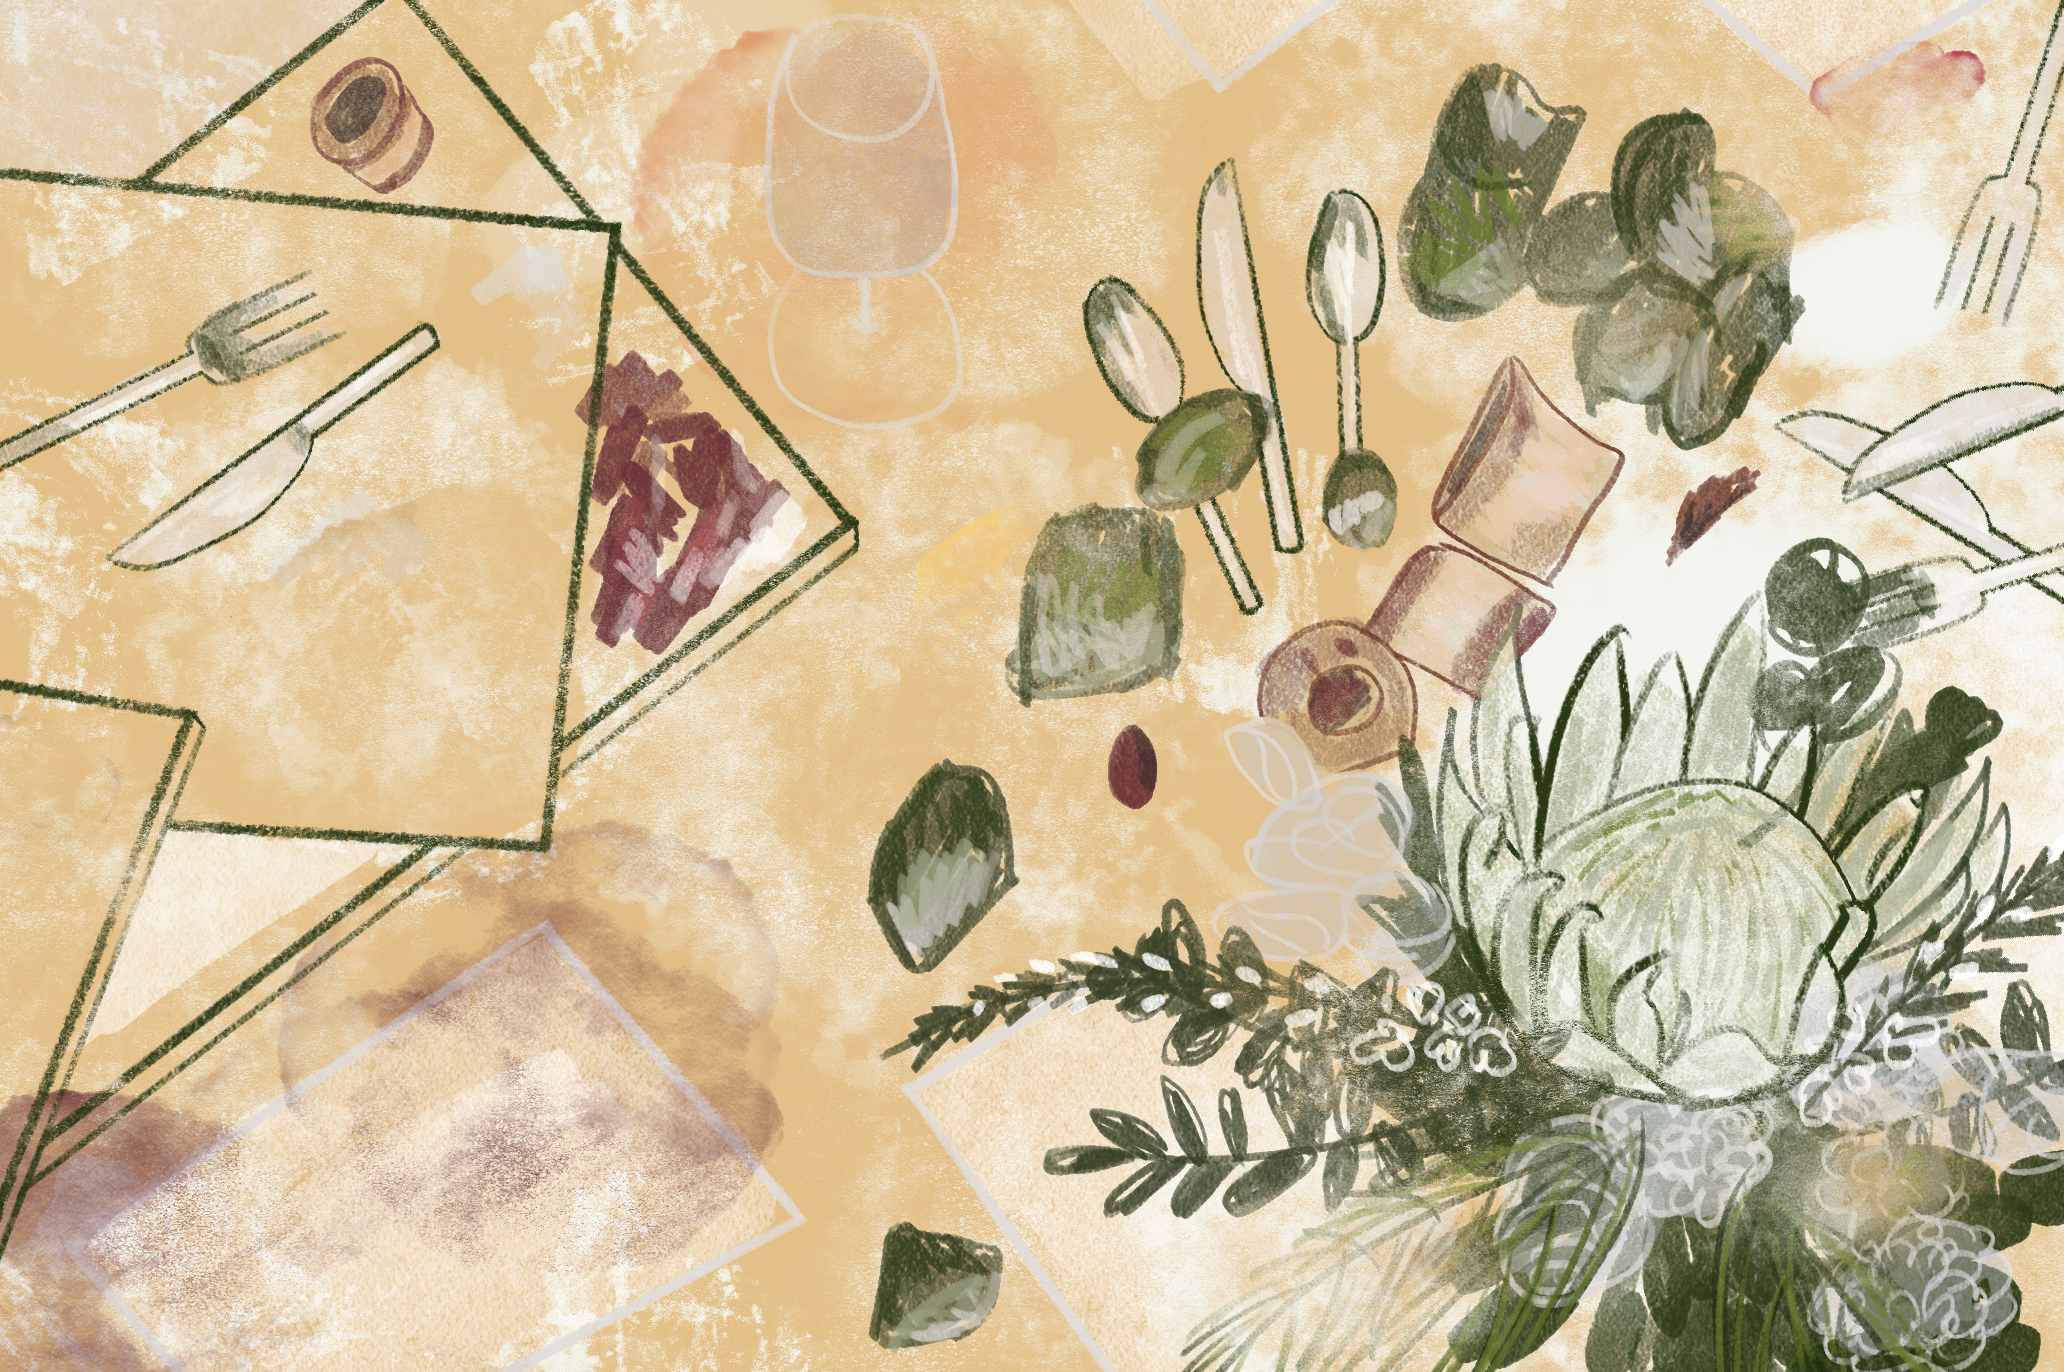 Image: Illustrated image depicting the aftermath of the MARROW meal. The image views the carnage from above, looking down at a tan colored table. In the bottom right corner is a green bouquet of flowers with a big artichoke shaped one in the middle. Scattered around it are discarded artichoke leaves, silverware, and red stains from fruits and meat. Stylistically the image is as messy as what it portrays with brisk, simple lines. Illustration by Kiki Dupont.